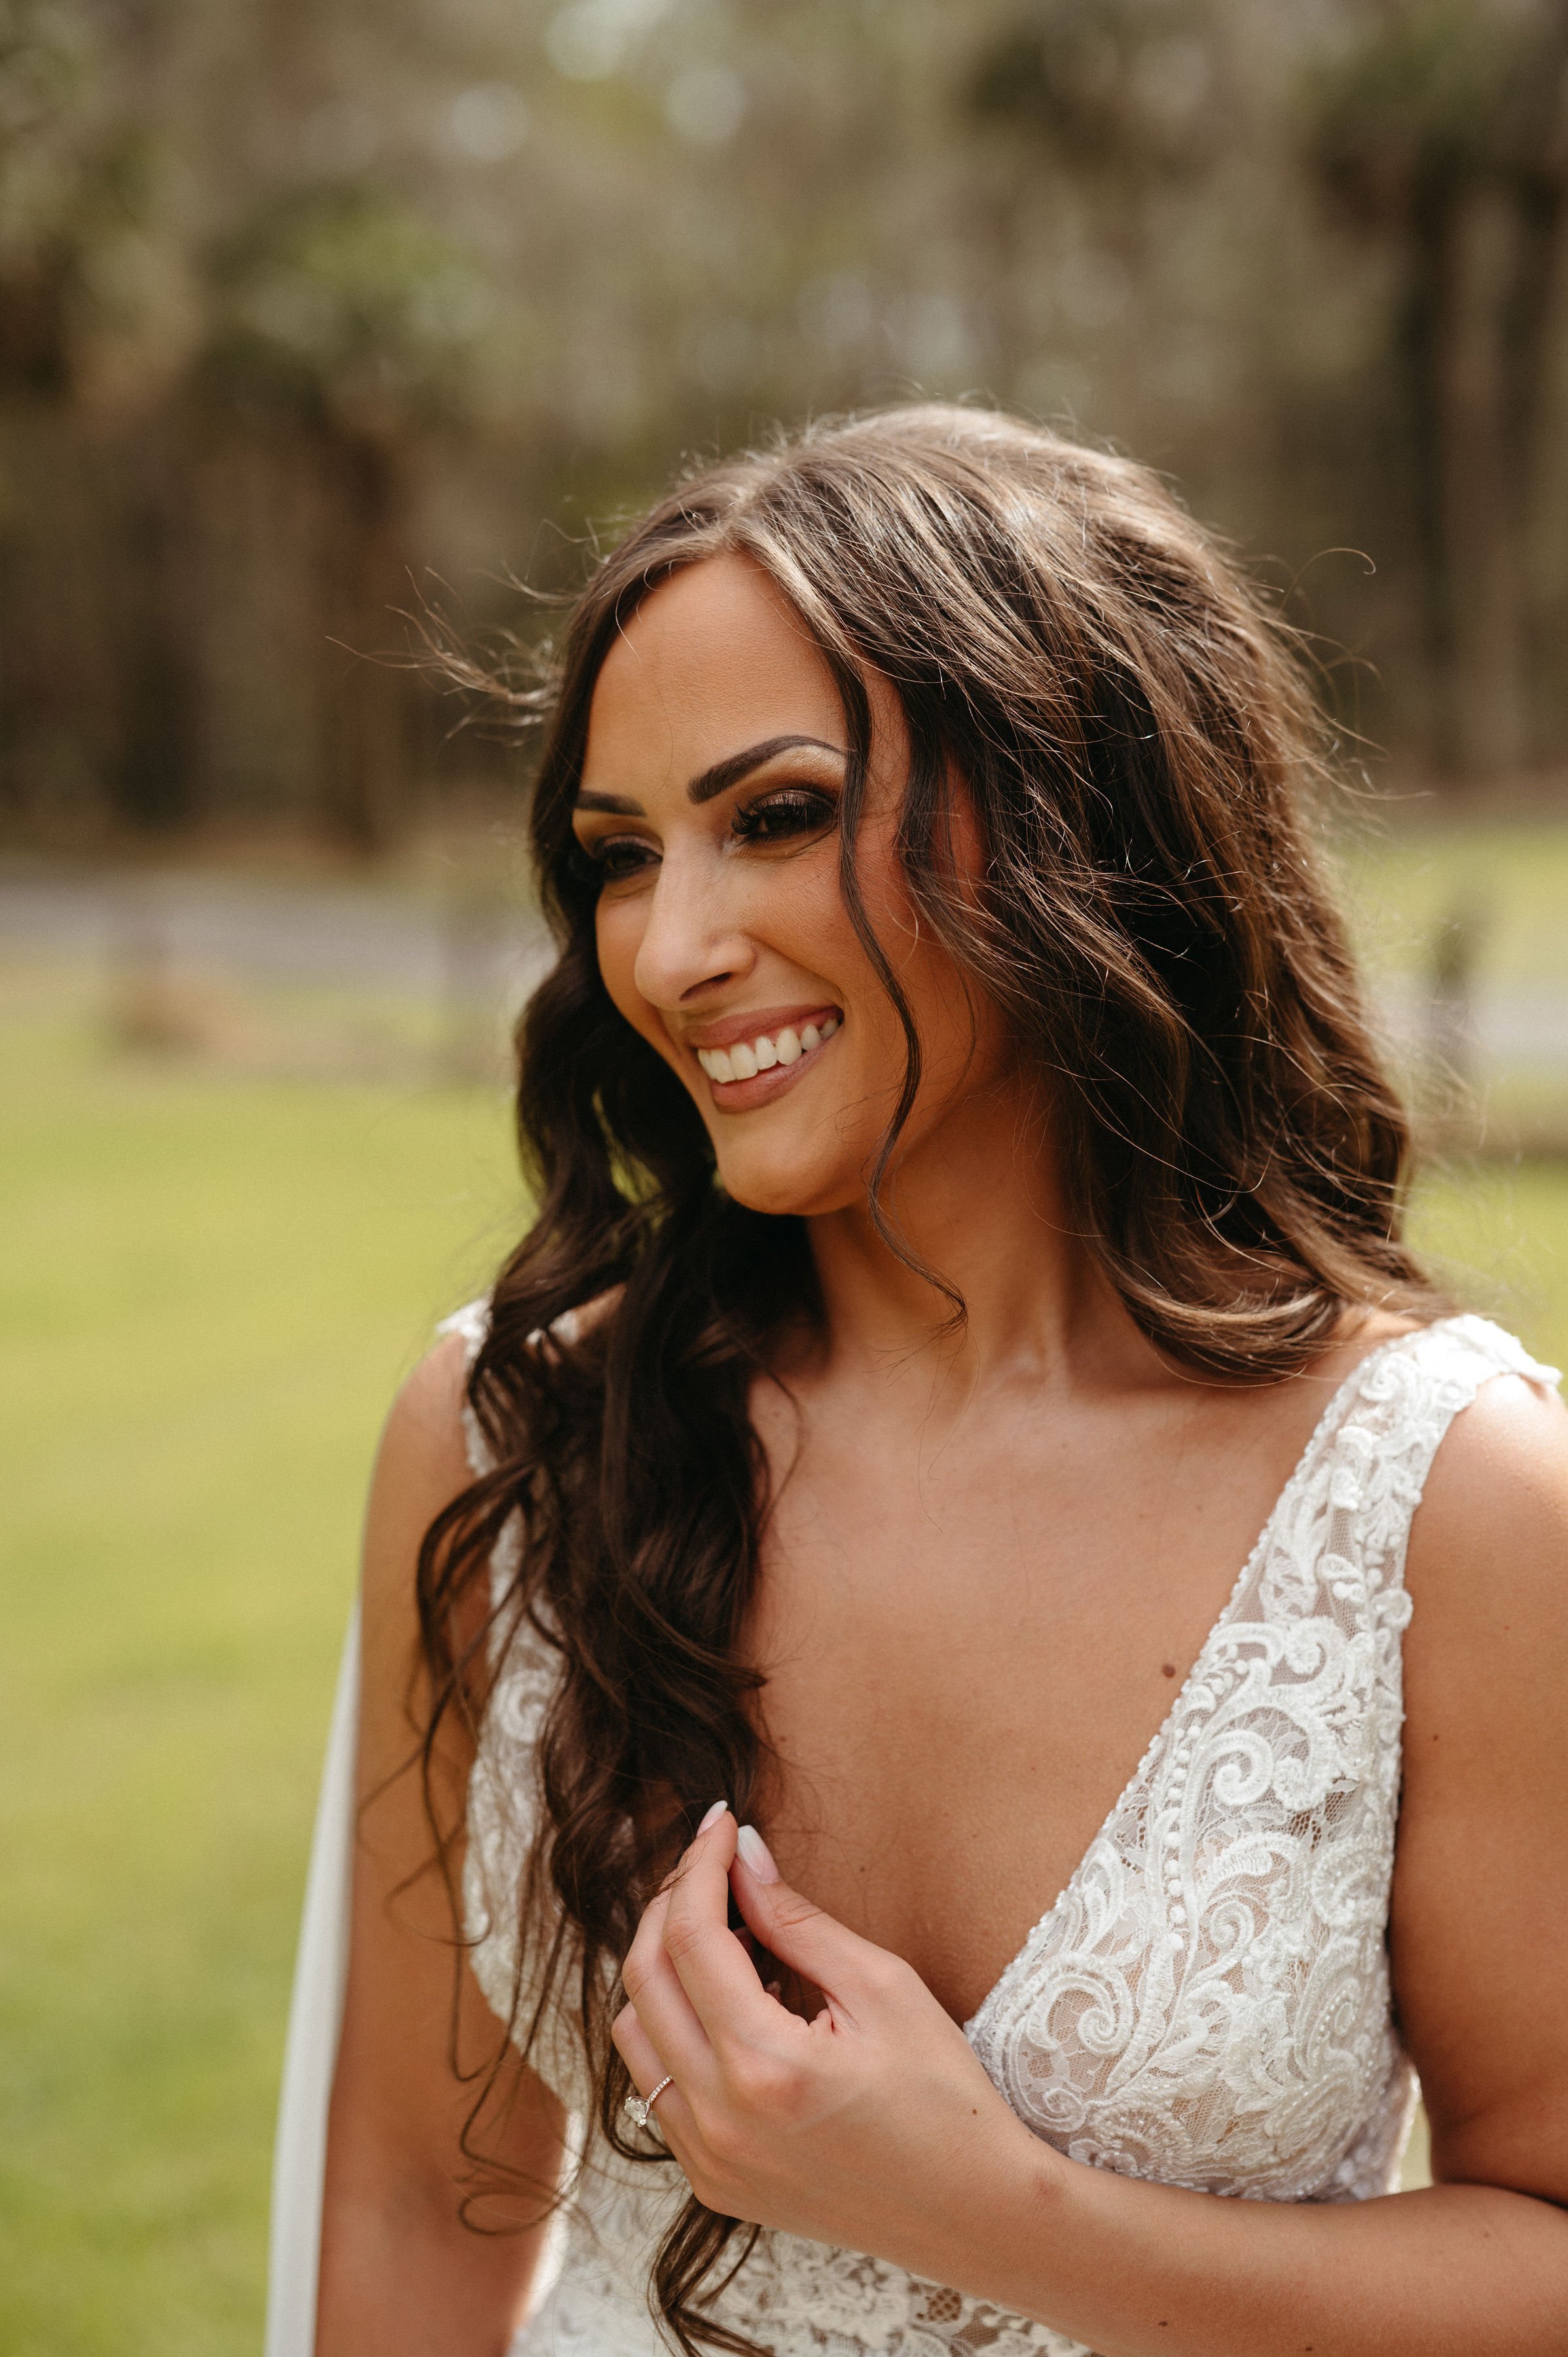 ivory-and-beau-blog-down-for-the-gown-lorren-real-bride-southern-bride-maggie-sottero-wedding-dress-made-with-love-bridal-wings-savannah-bridal-shop-savannah-bridal-boutique-savannah-georgia-The_Buie_Barn_Hall_Wedding_March_2022-16.jpg